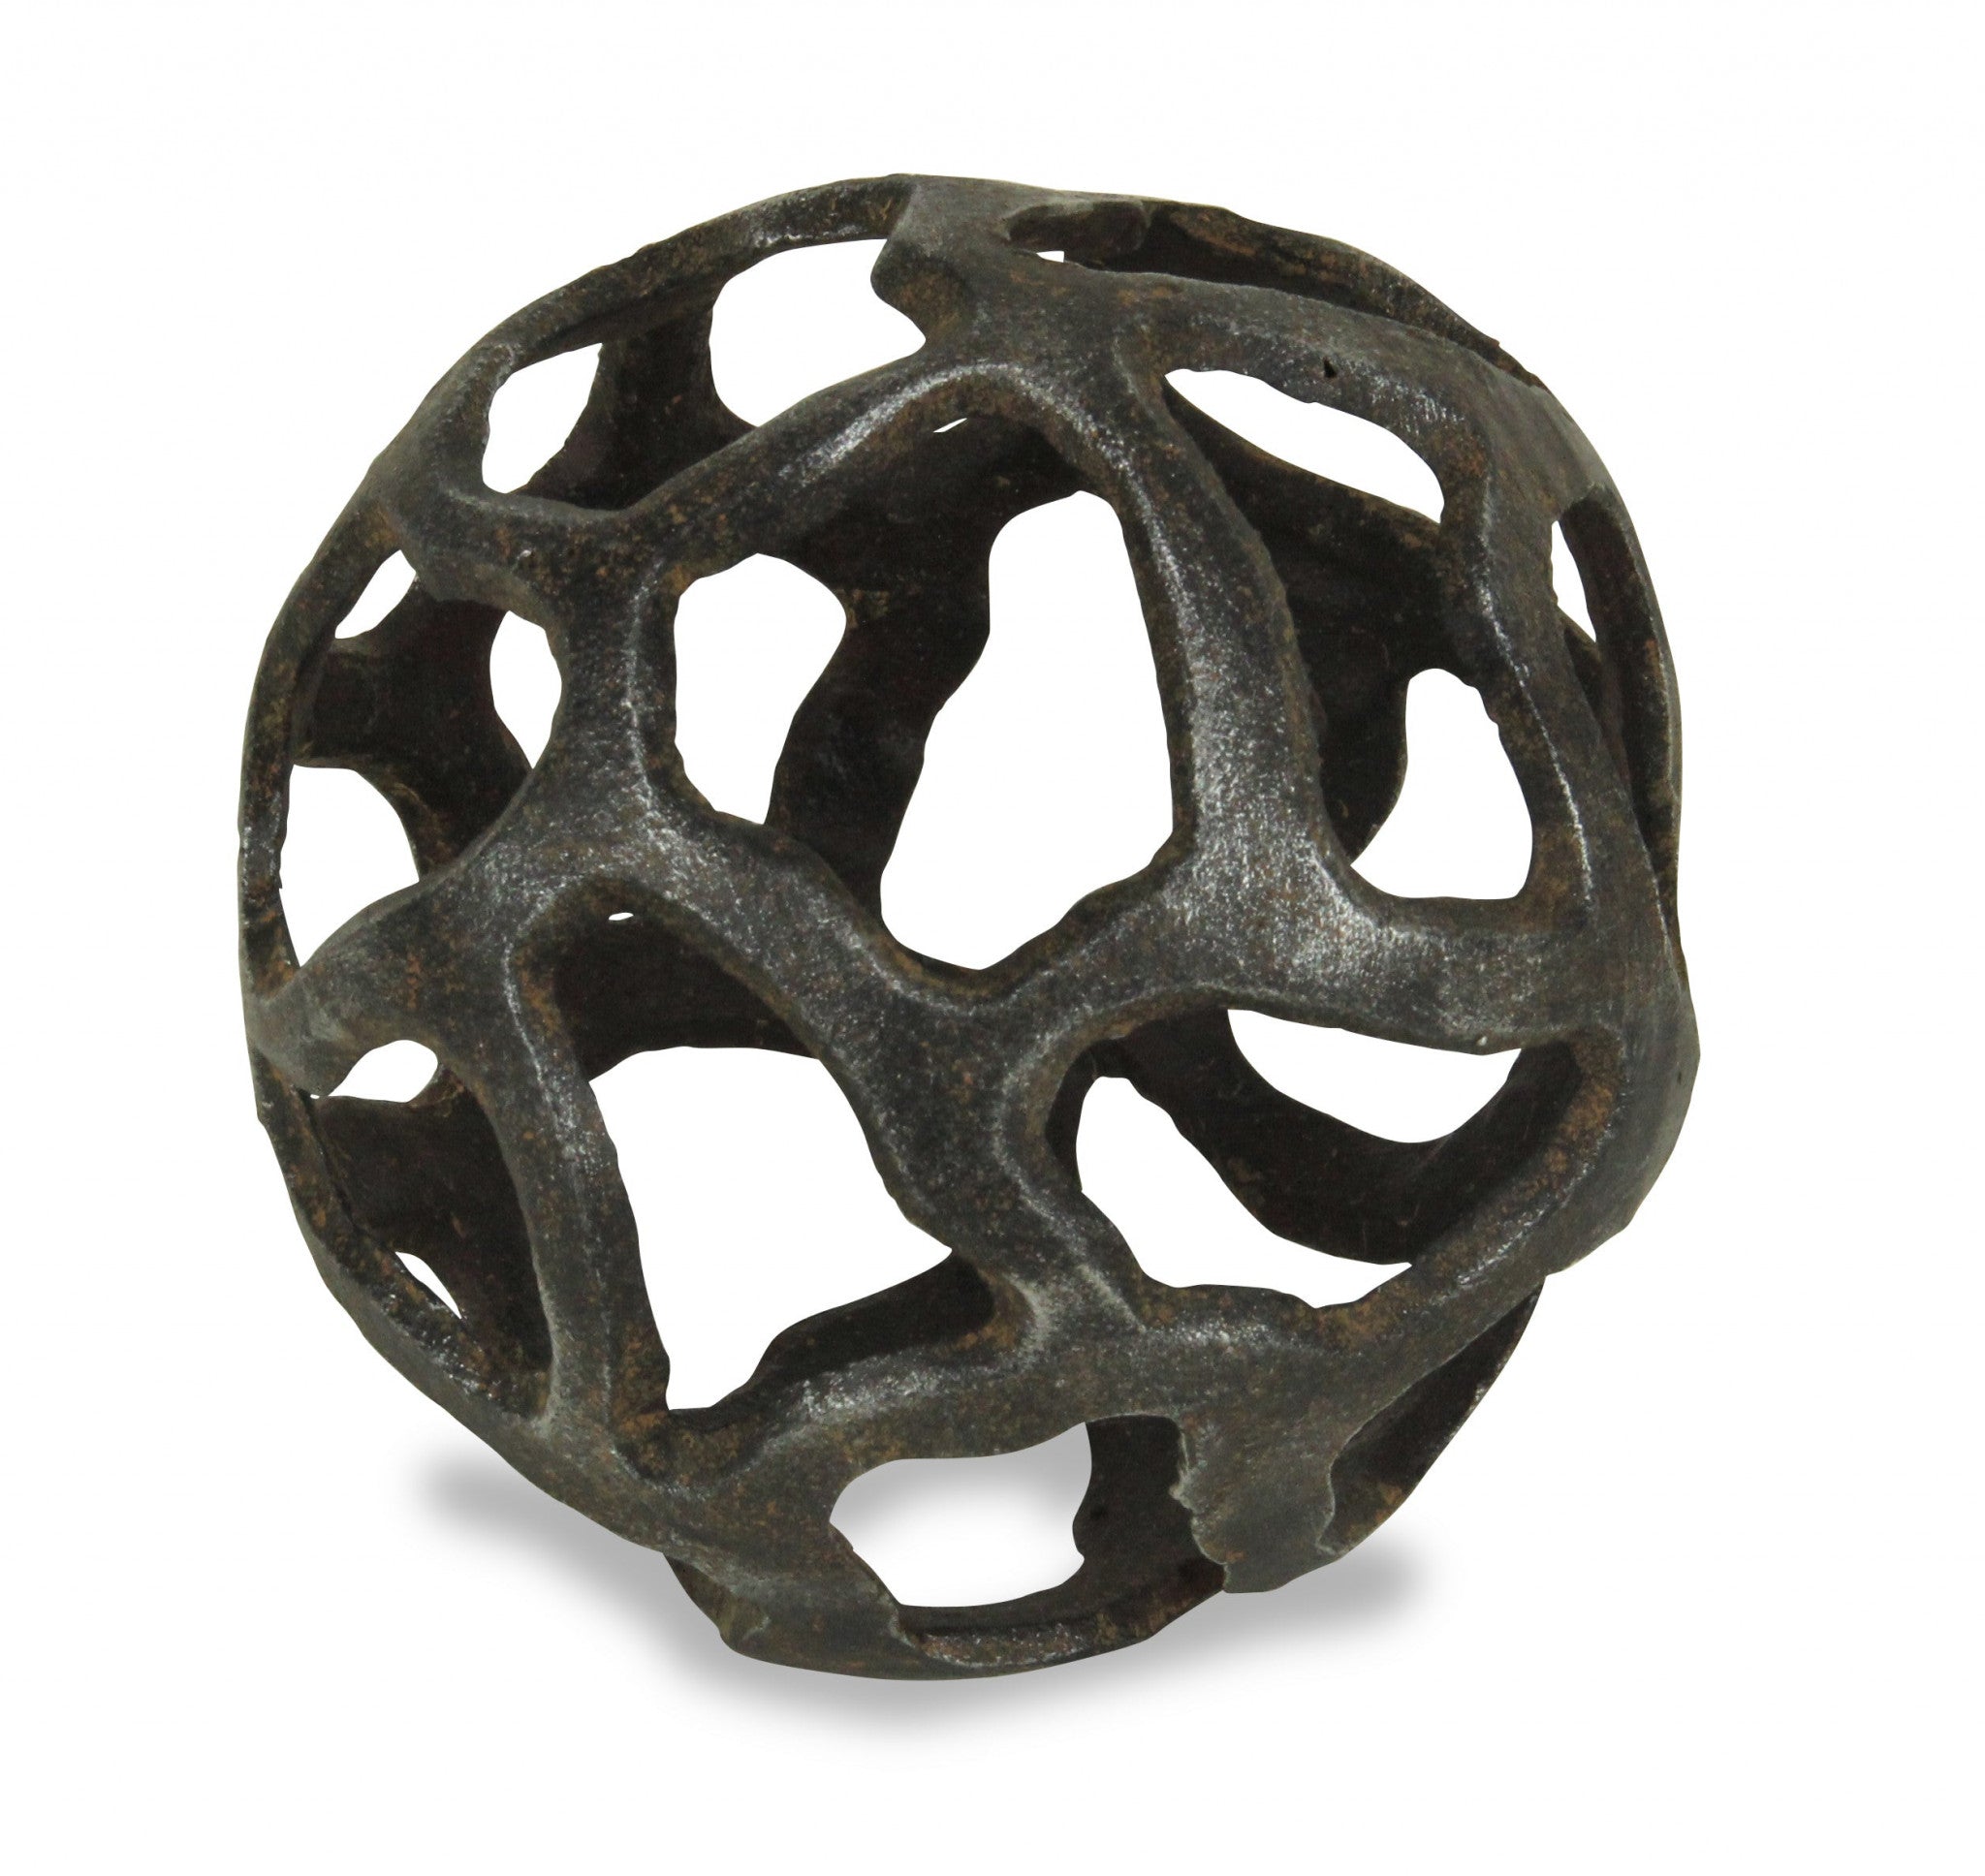 6" Natural Black Cast Iron Abstract Decorative Orb